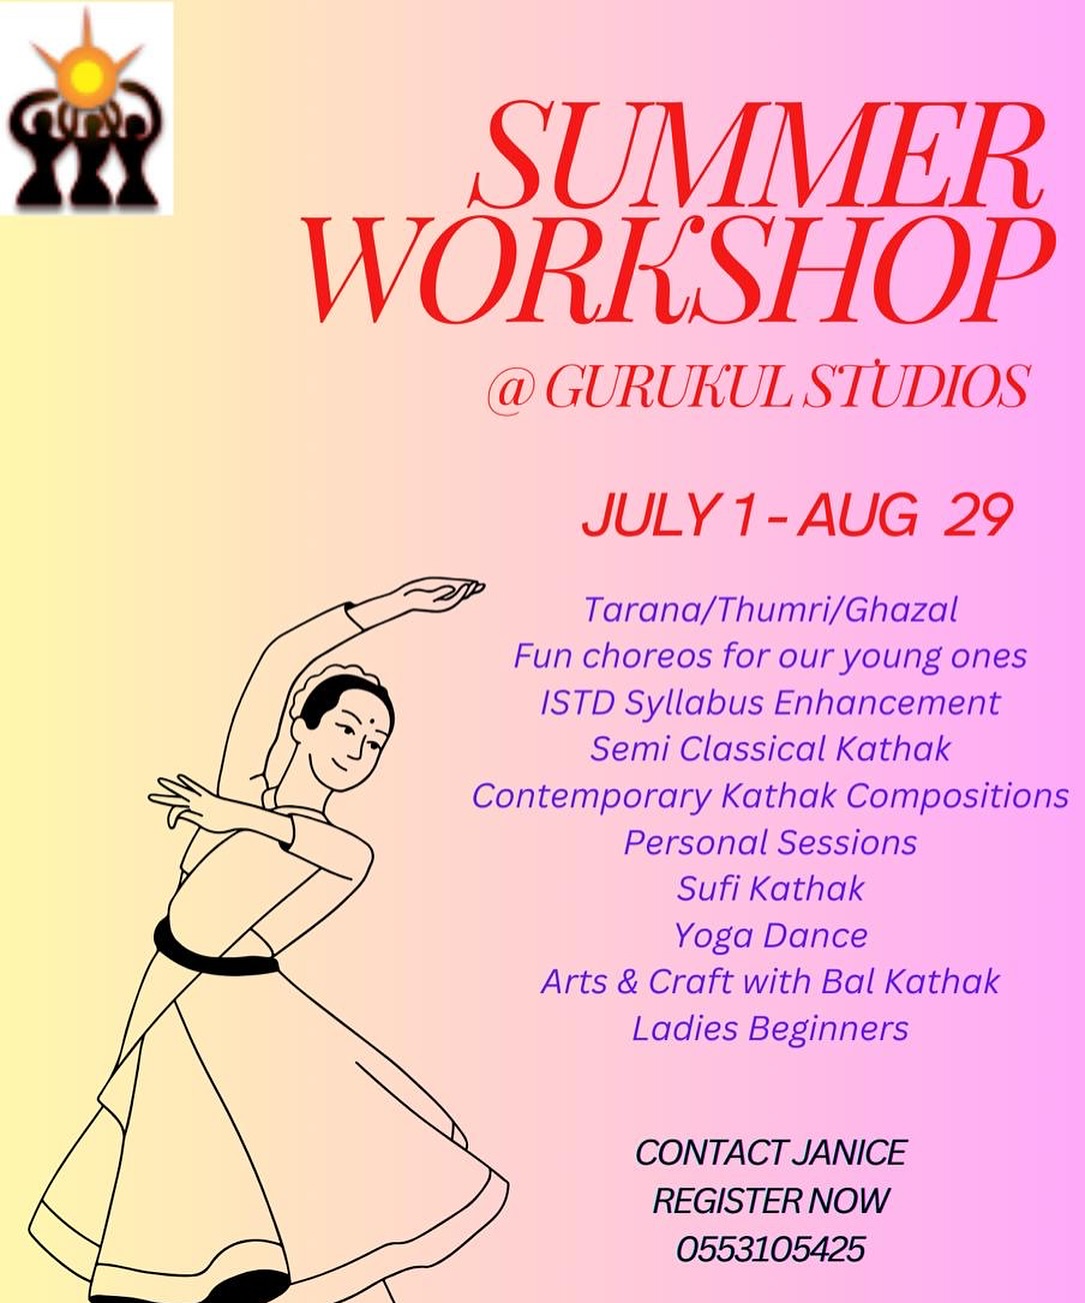 Dear Dancers, 

Summer is here with non-stop fun and learning options. Beat the heat by joining our various workshops✨
Register your interest the soonest with Janice and she will work out the best suited schedule for you🧘‍♀️ 

Contact Janice to register NOW! 
055 310 5425

Happy Dancing 
Team Gurukul 💃🏻

Will you be joining us this summer?❤️‍🔥